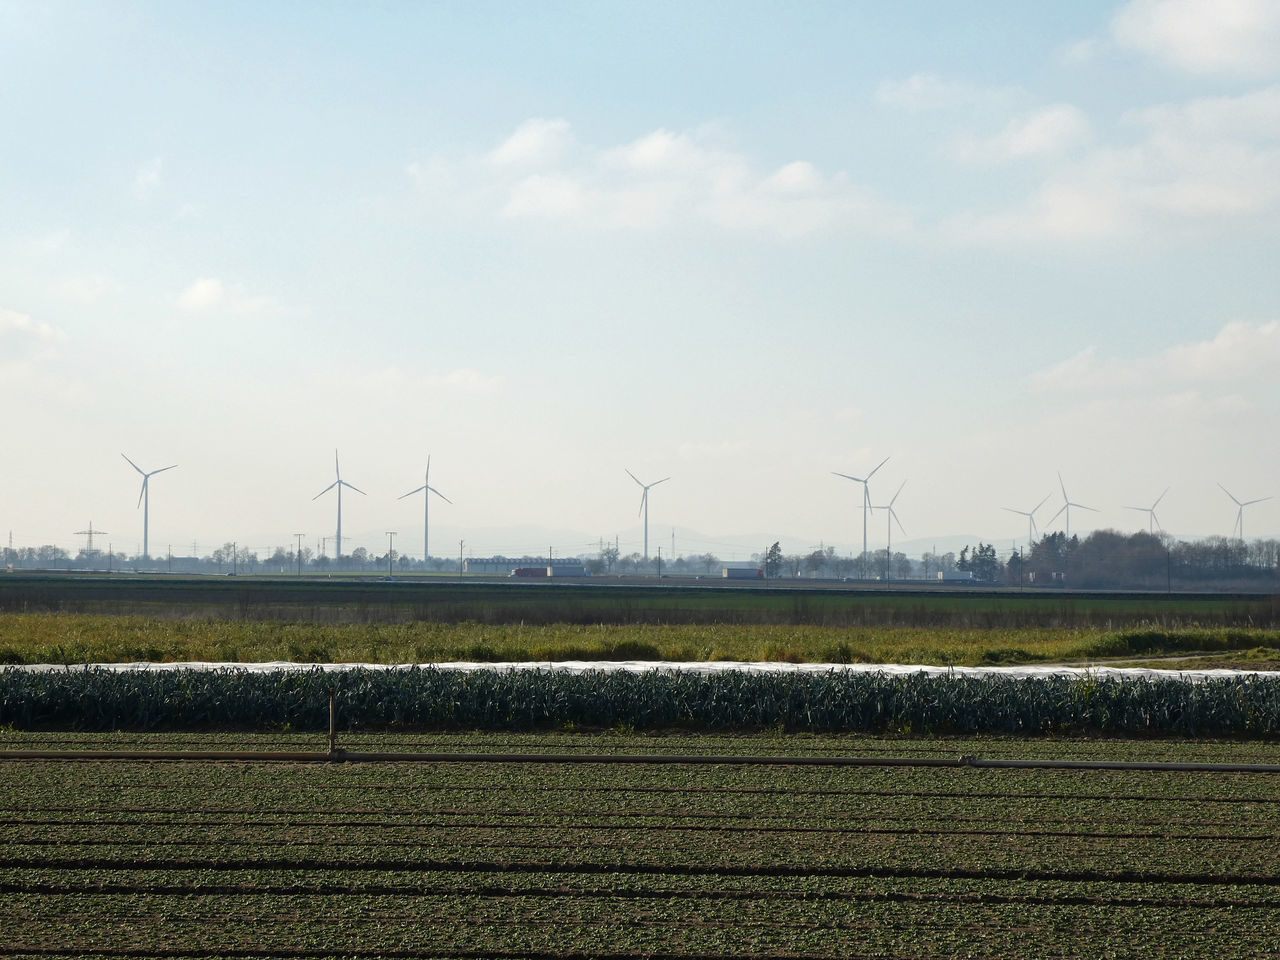 VIEW OF WIND TURBINES ON LAND